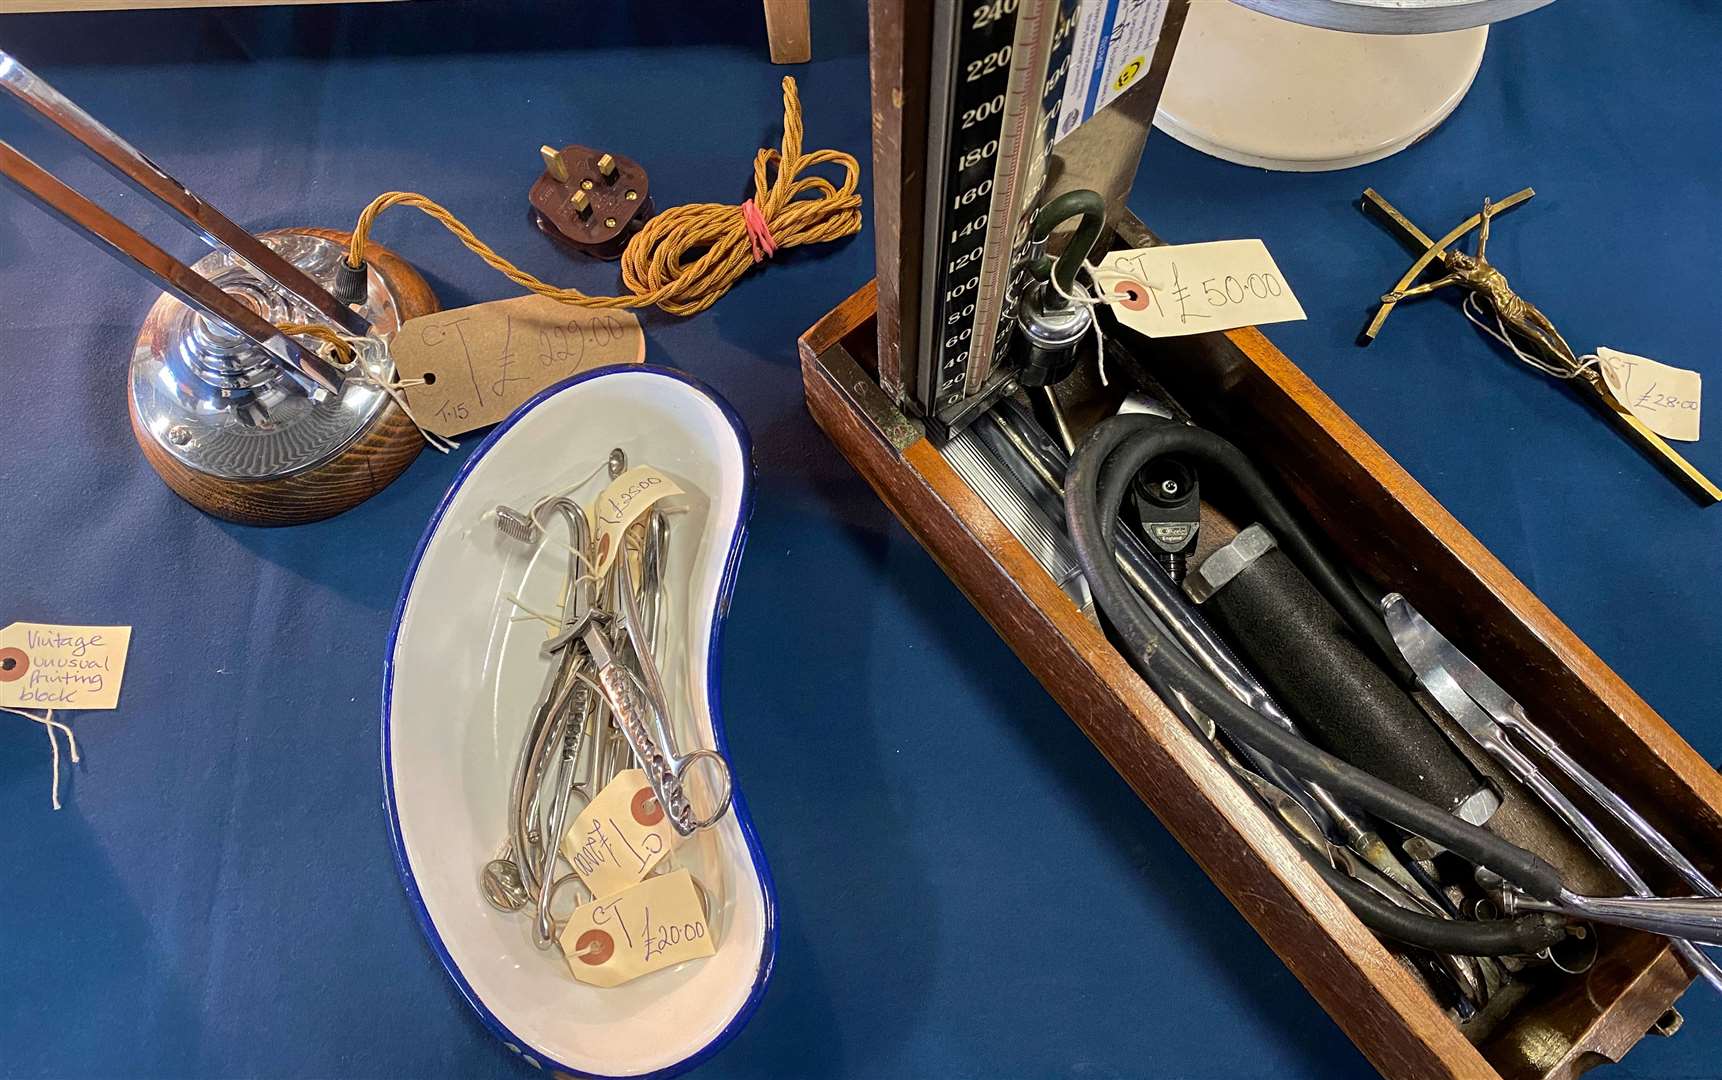 One of our most unusual finds was this collection of medical equipment